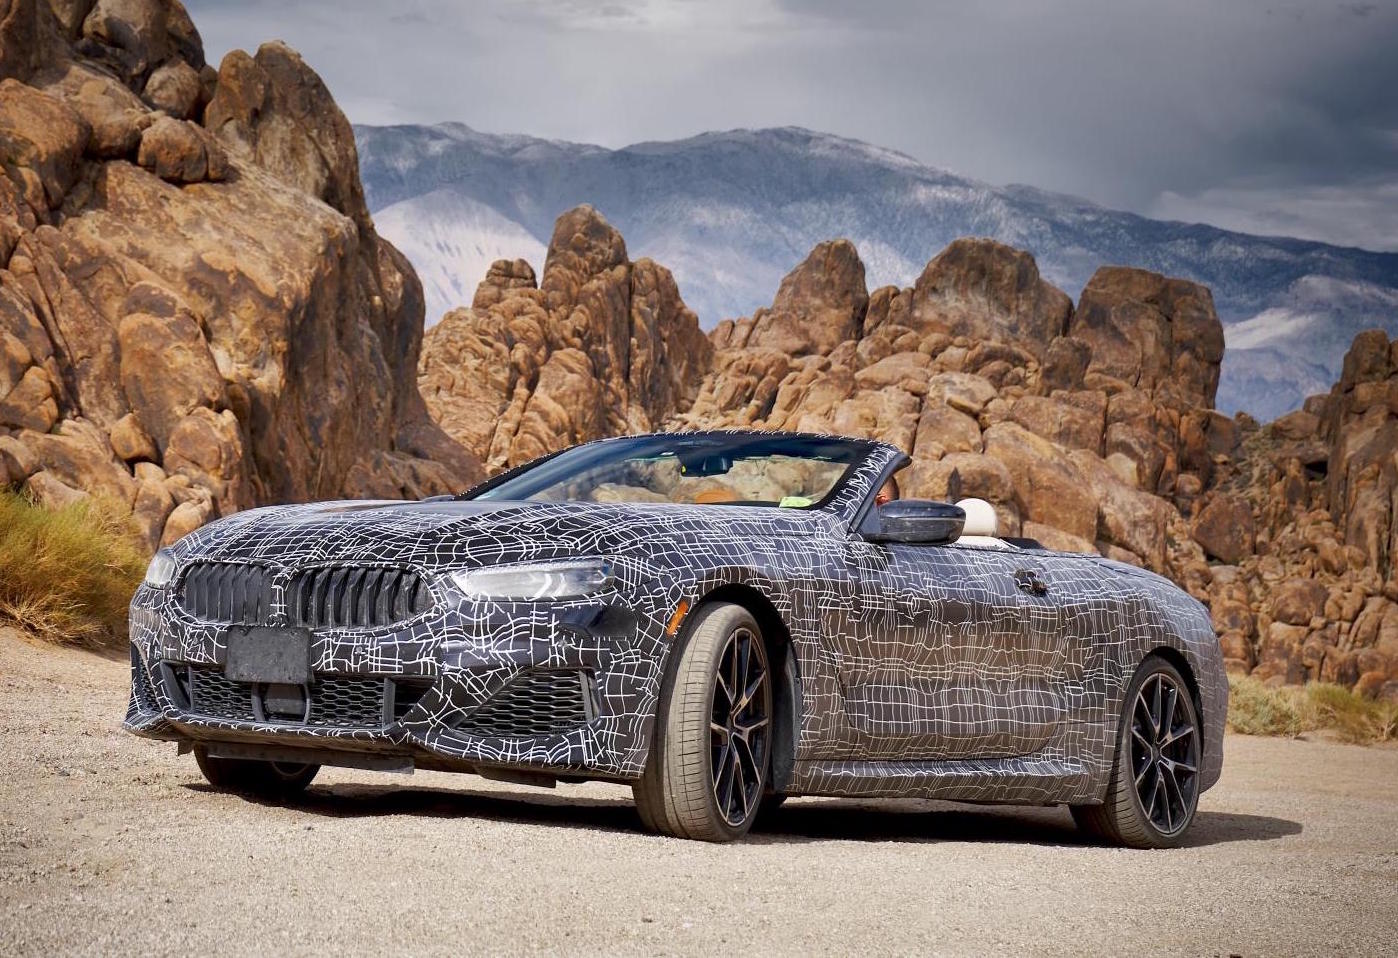 New BMW 8 Series convertible undergoes extreme hot weather testing